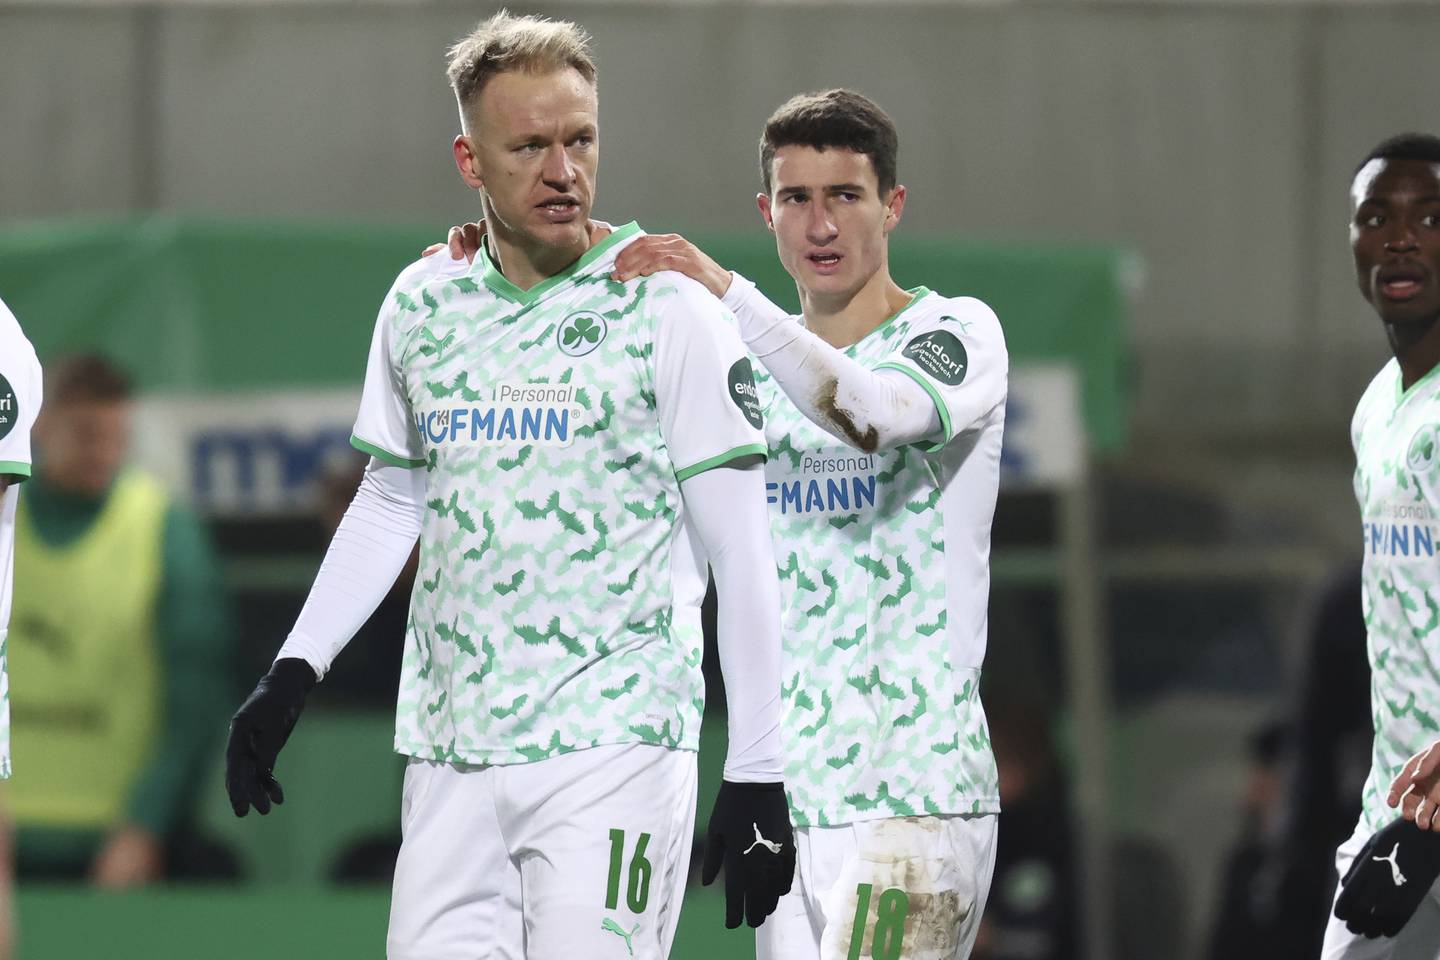 12 December 2021, Bavaria, F'rth: Football: Bundesliga, SpVgg Greuther F'rth - 1. FC Union Berlin, Matchday 15, at Sportpark Ronhof Thomas Sommer. Fuerth's Havard Nielsen, left, celebrates with Marco Meyerhoefer after scoring his side's opening goal during the German Bundesliga soccer match between Greuther Fuerth and Union Berlin, at the Sportpark Ronhof Thomas Sommer, in Fureth, Germany, Sunday, Dec. 12, 2021. (Daniel Karmann)